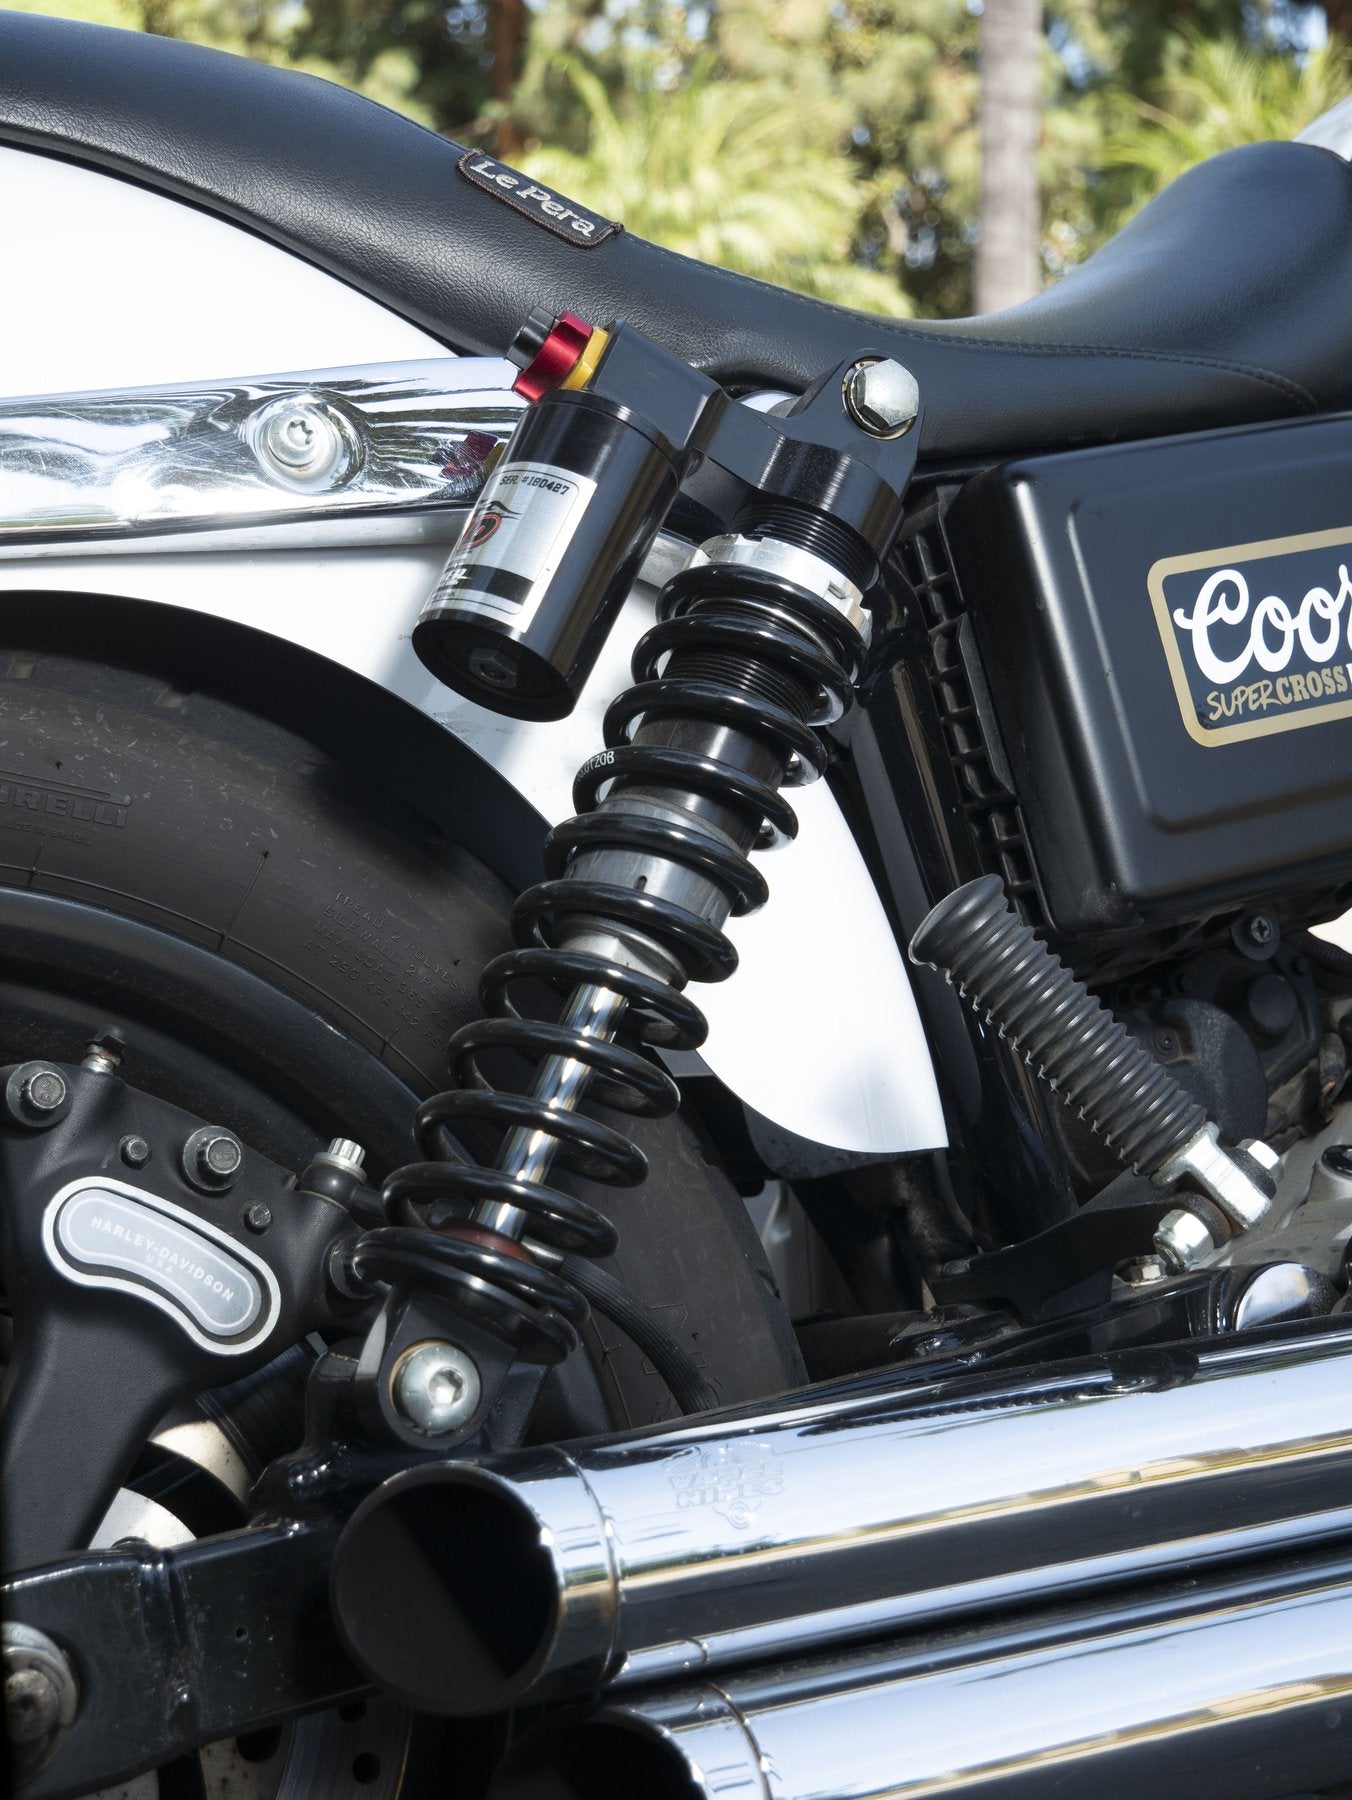 RS-1 SHOCK ABSORBER FOR DYNA